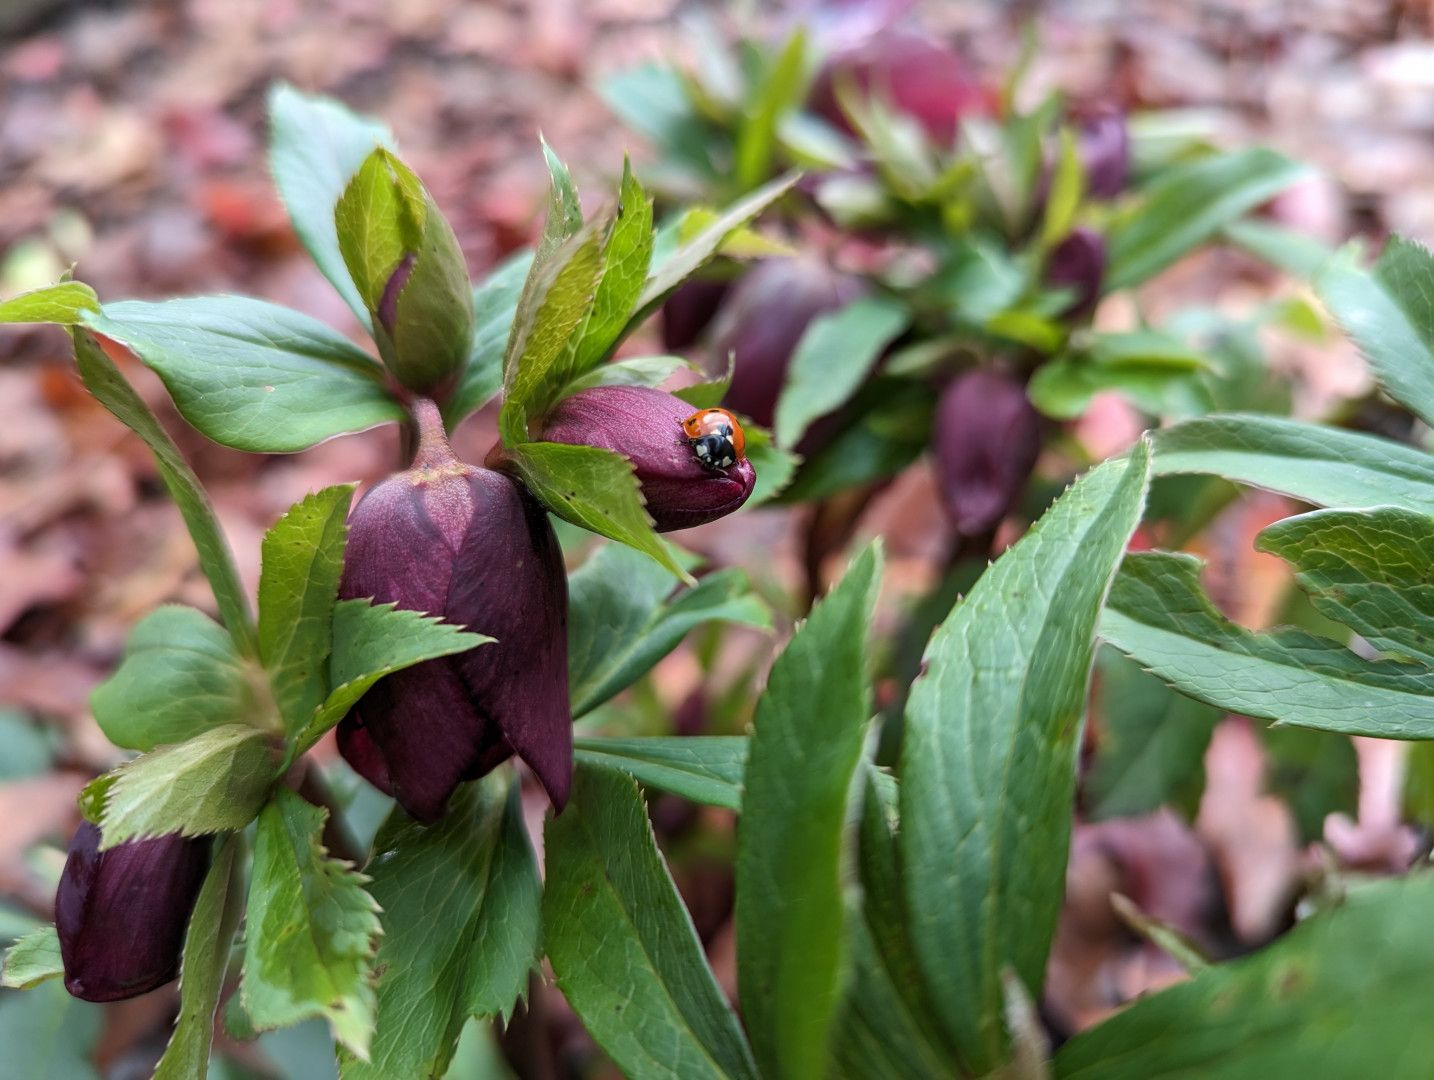 A photo of helleborus orientalis, aka Lenten rose, a plant with mid-sized pointed and serrated green leaves featuring maroon flowers... and a lady bug!